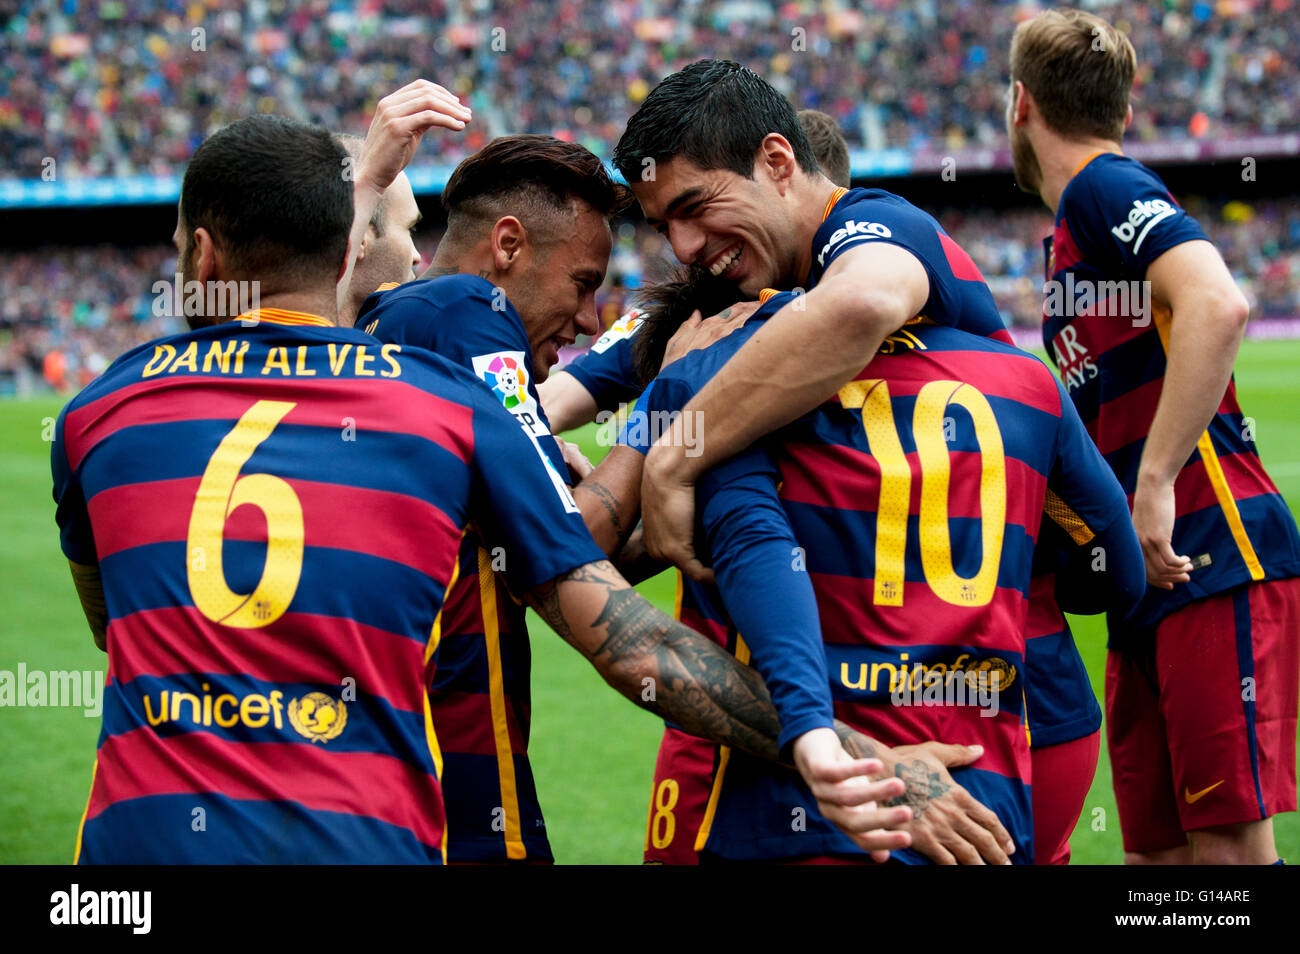 Barcelona, Spain. 8th May, 2016. FC Barcelona's Luis Suarez (R2), Lionel Messi (#10), Neymar (L2) and Dani Alves (L) celebrate after scoring during the Spanish LIGA match between FC Barcelona and Espanyol at the Camp Nou stadium in Barcelona, Spain, May 8, 2016. FC Barcelona won 5-0. Credit:  Lino De Vallier/Xinhua/Alamy Live News Stock Photo